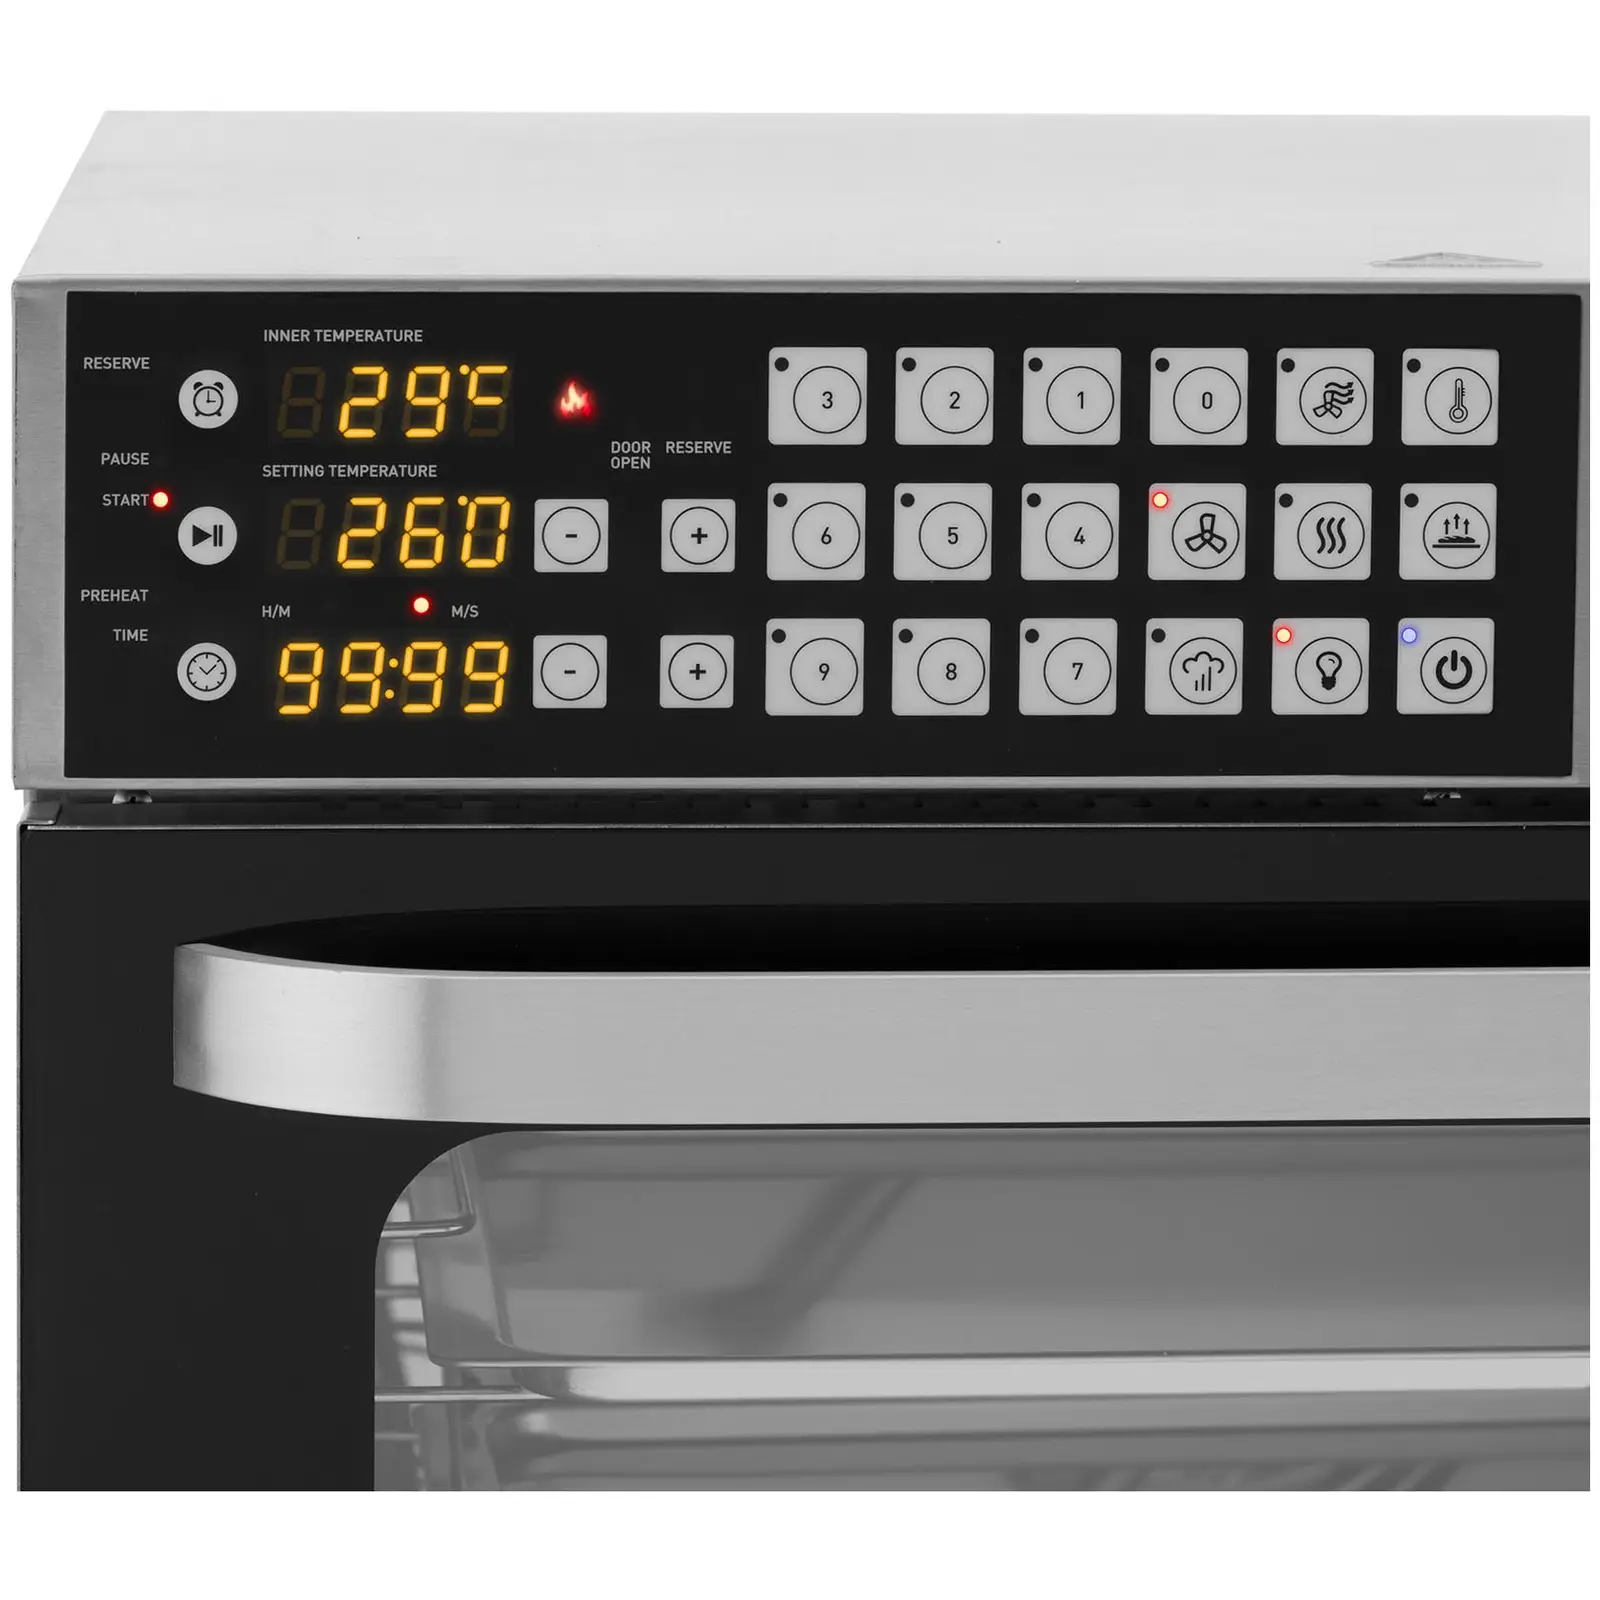 Hot air oven - 2800 W - Timer - 6 functions - 4 Trays - 1